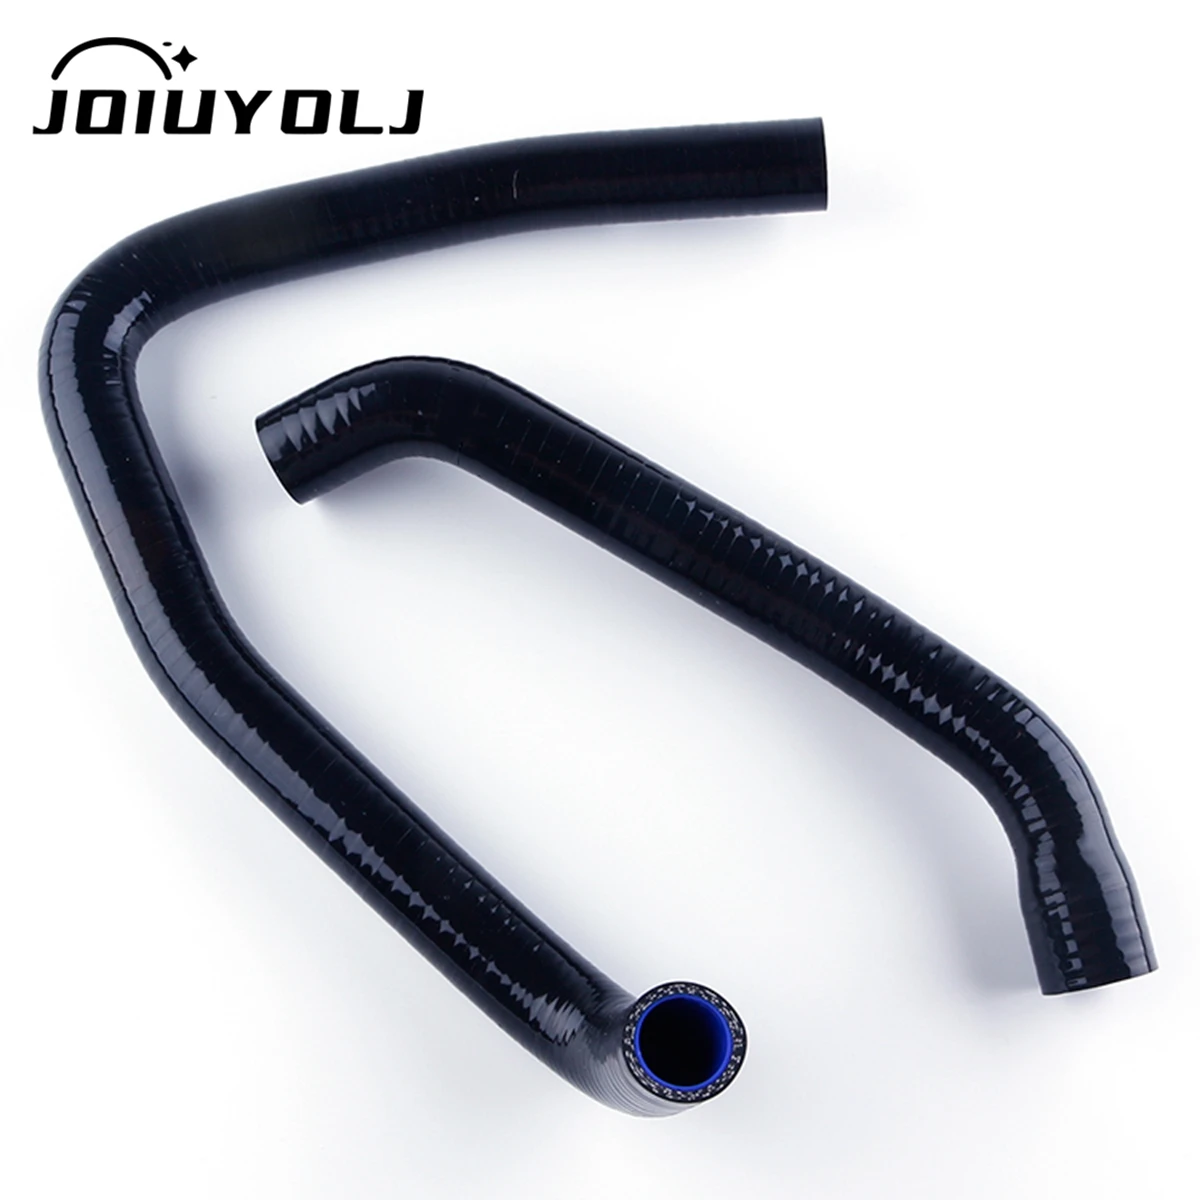 

For 2006 2007 2008 2009 2010 2011 KAWASAKI Ninja 1400 ZX14R ZX14 ZX 14 14R Motorcycle Silicone Radiator Coolant Hose Pipe Kit